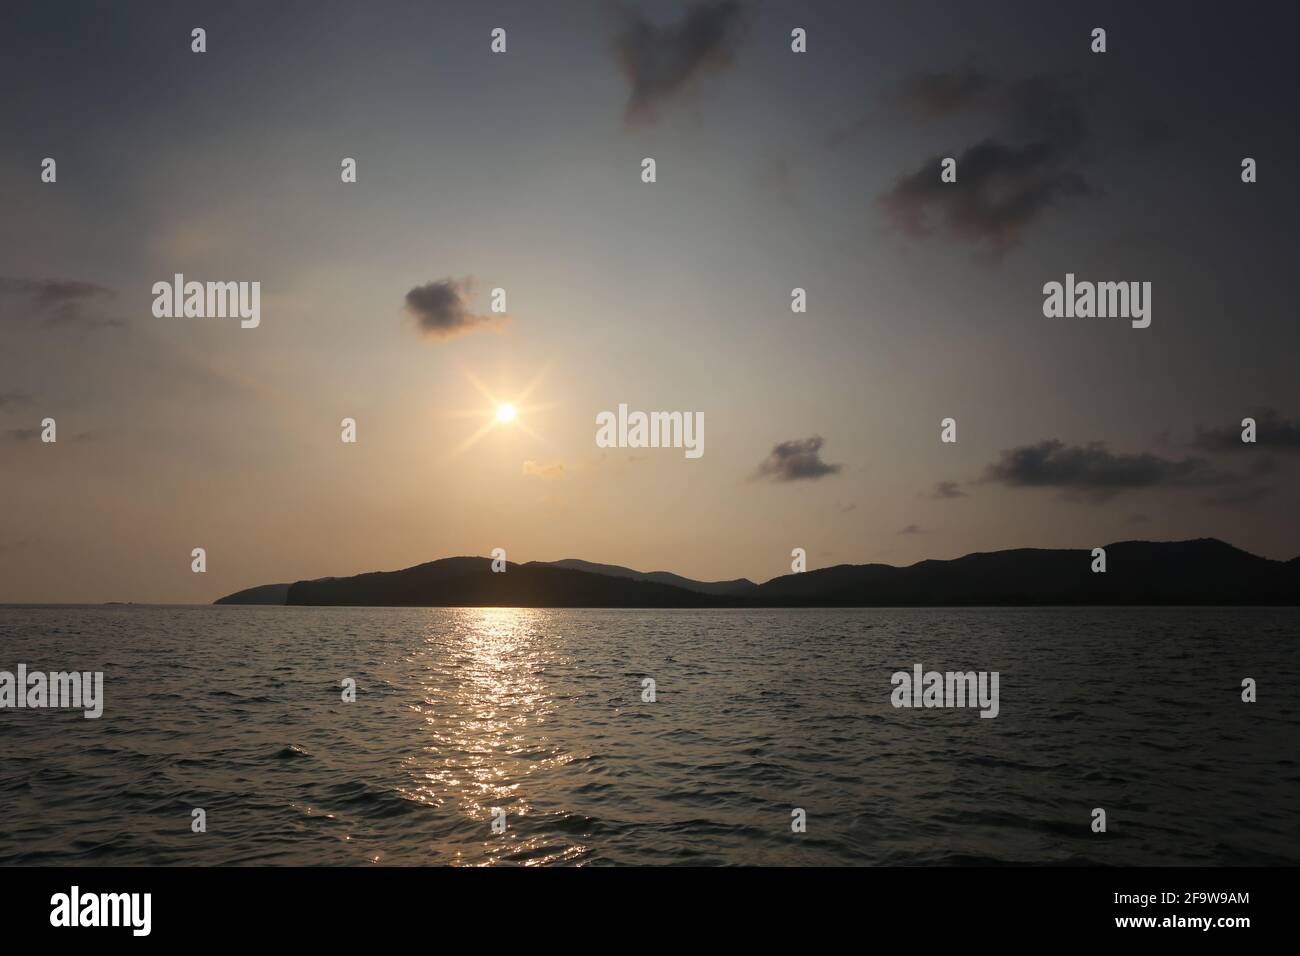 Sunset from the island in the sea,Landscape of sea and mountains in the evening with bright sky and near twilight time. Stock Photo